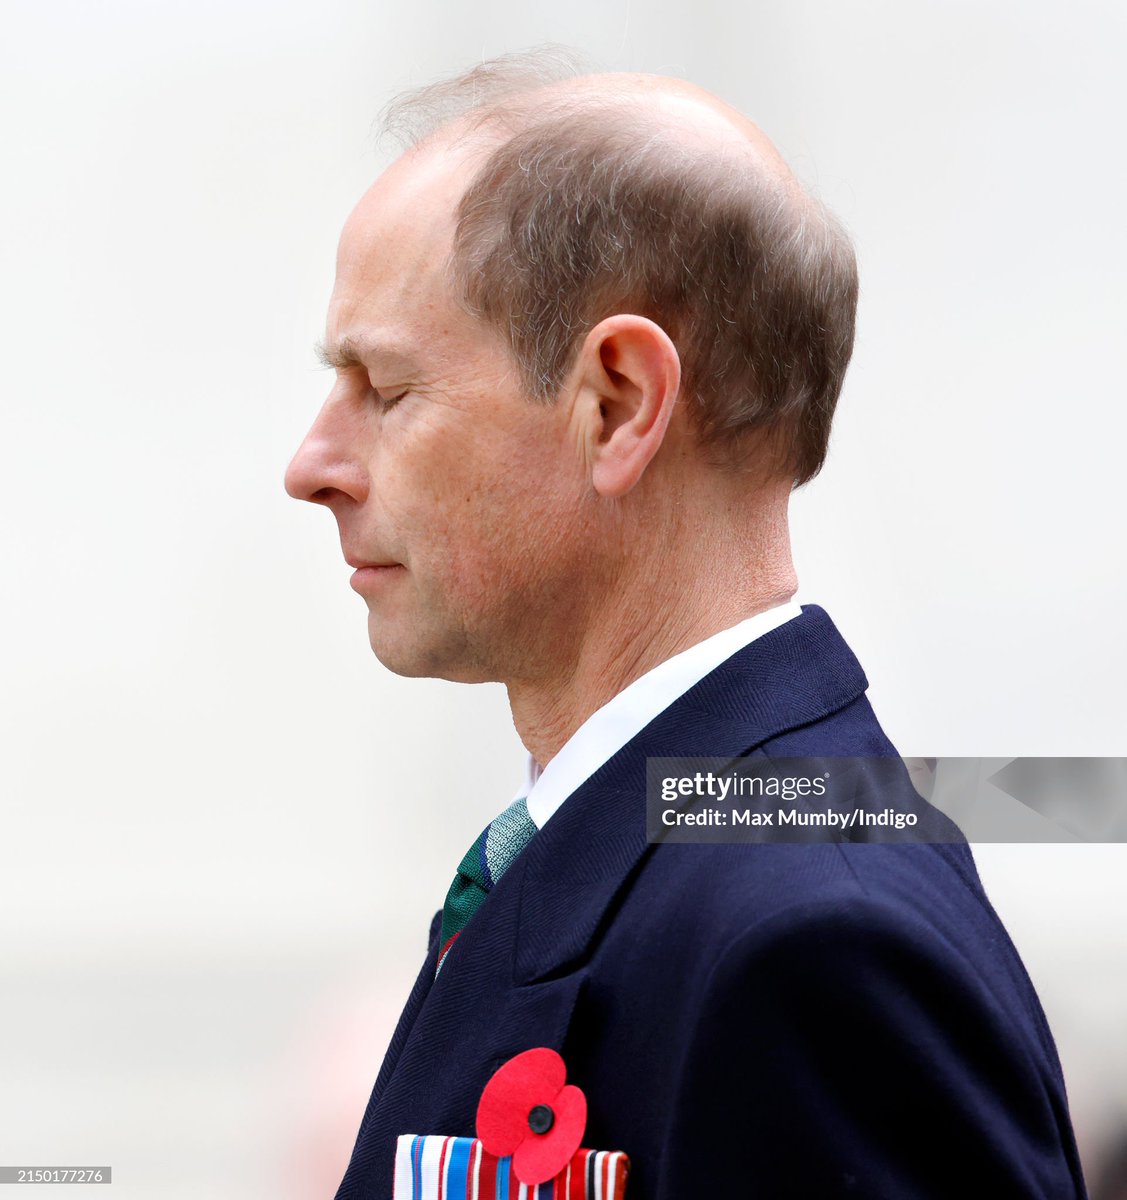 ✨ What a beautiful photo of The Duke of Edinburgh during the ANZAC Day Commemorations in London today ❤️

I was very happy to see HRH leading such an important event on behalf of HM The King.

Prince Edward really deserves this recognition 😊

📸 Max Mumby/Indigo/Getty